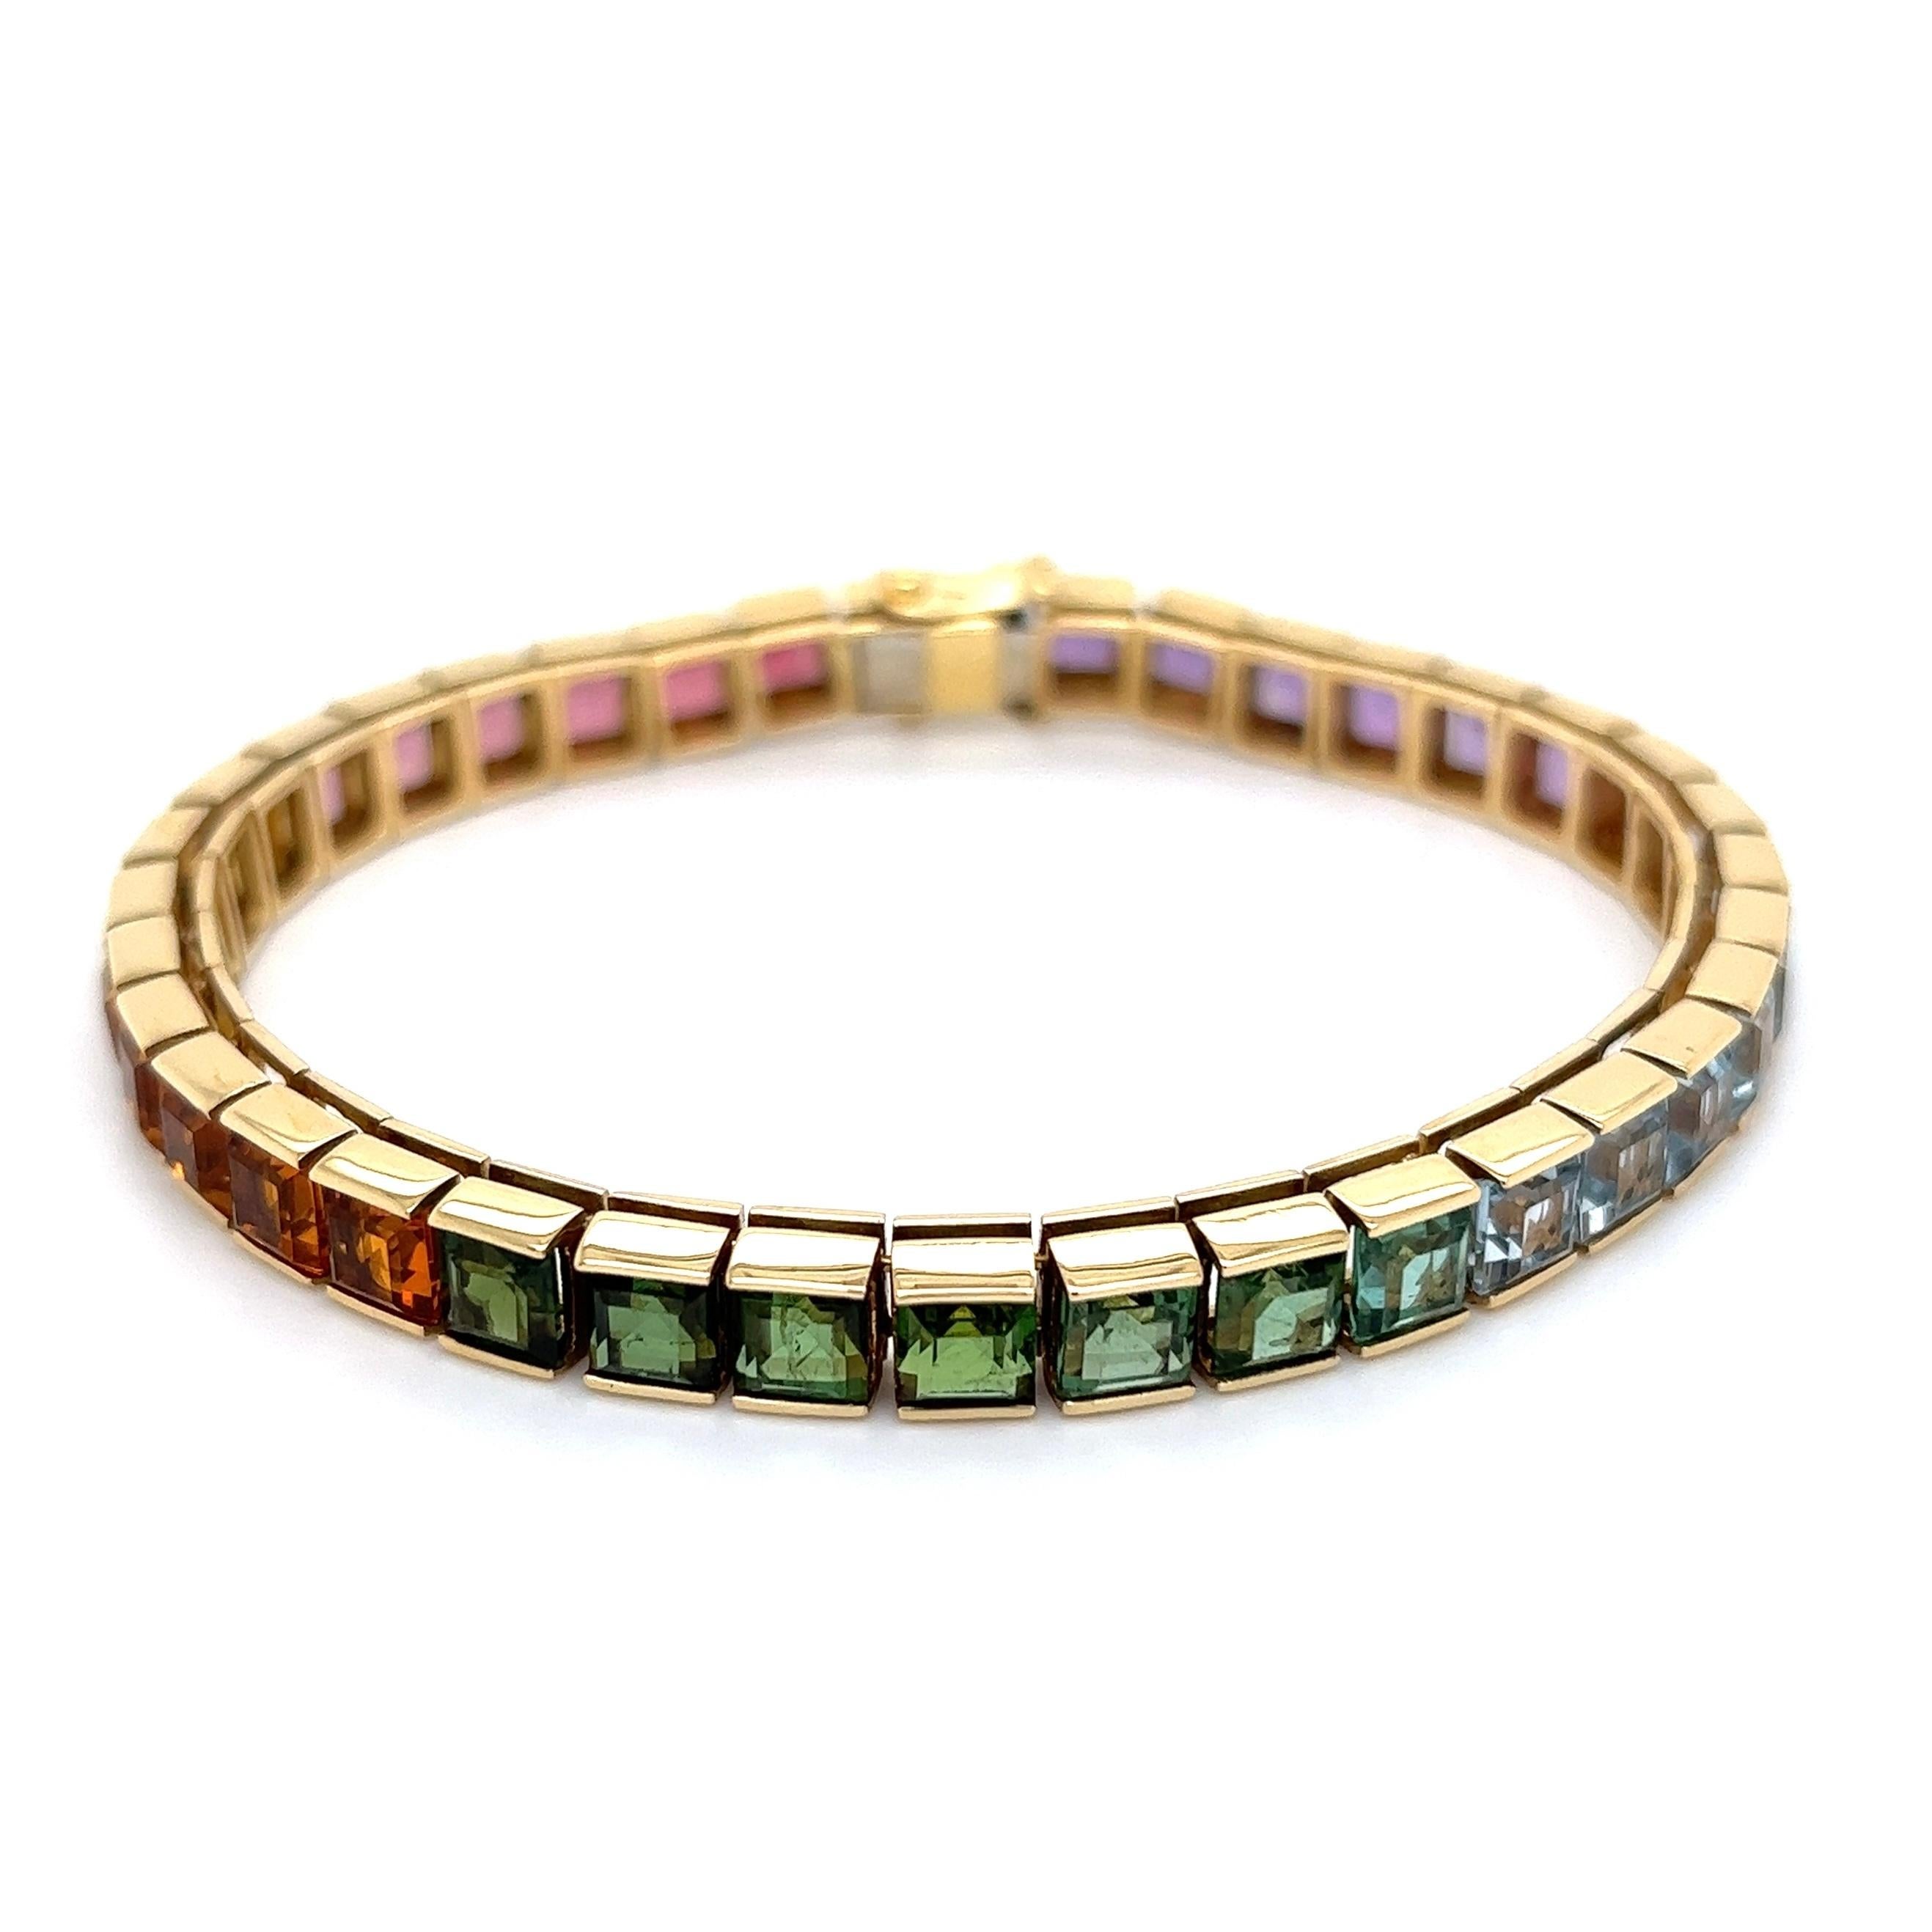 Simply Beautiful! Rainbow Multi Gemstone Line Gold Tennis Bracelet. Featuring 36 Pink Tourmaline, Citrine, Green Tourmaline, Blue Topaz and Amethyst, weighing approx. 25.00tcw. Measuring approx. 8” l x 0.25” w x 0.19” h. Hand-crafted in 18K Yellow